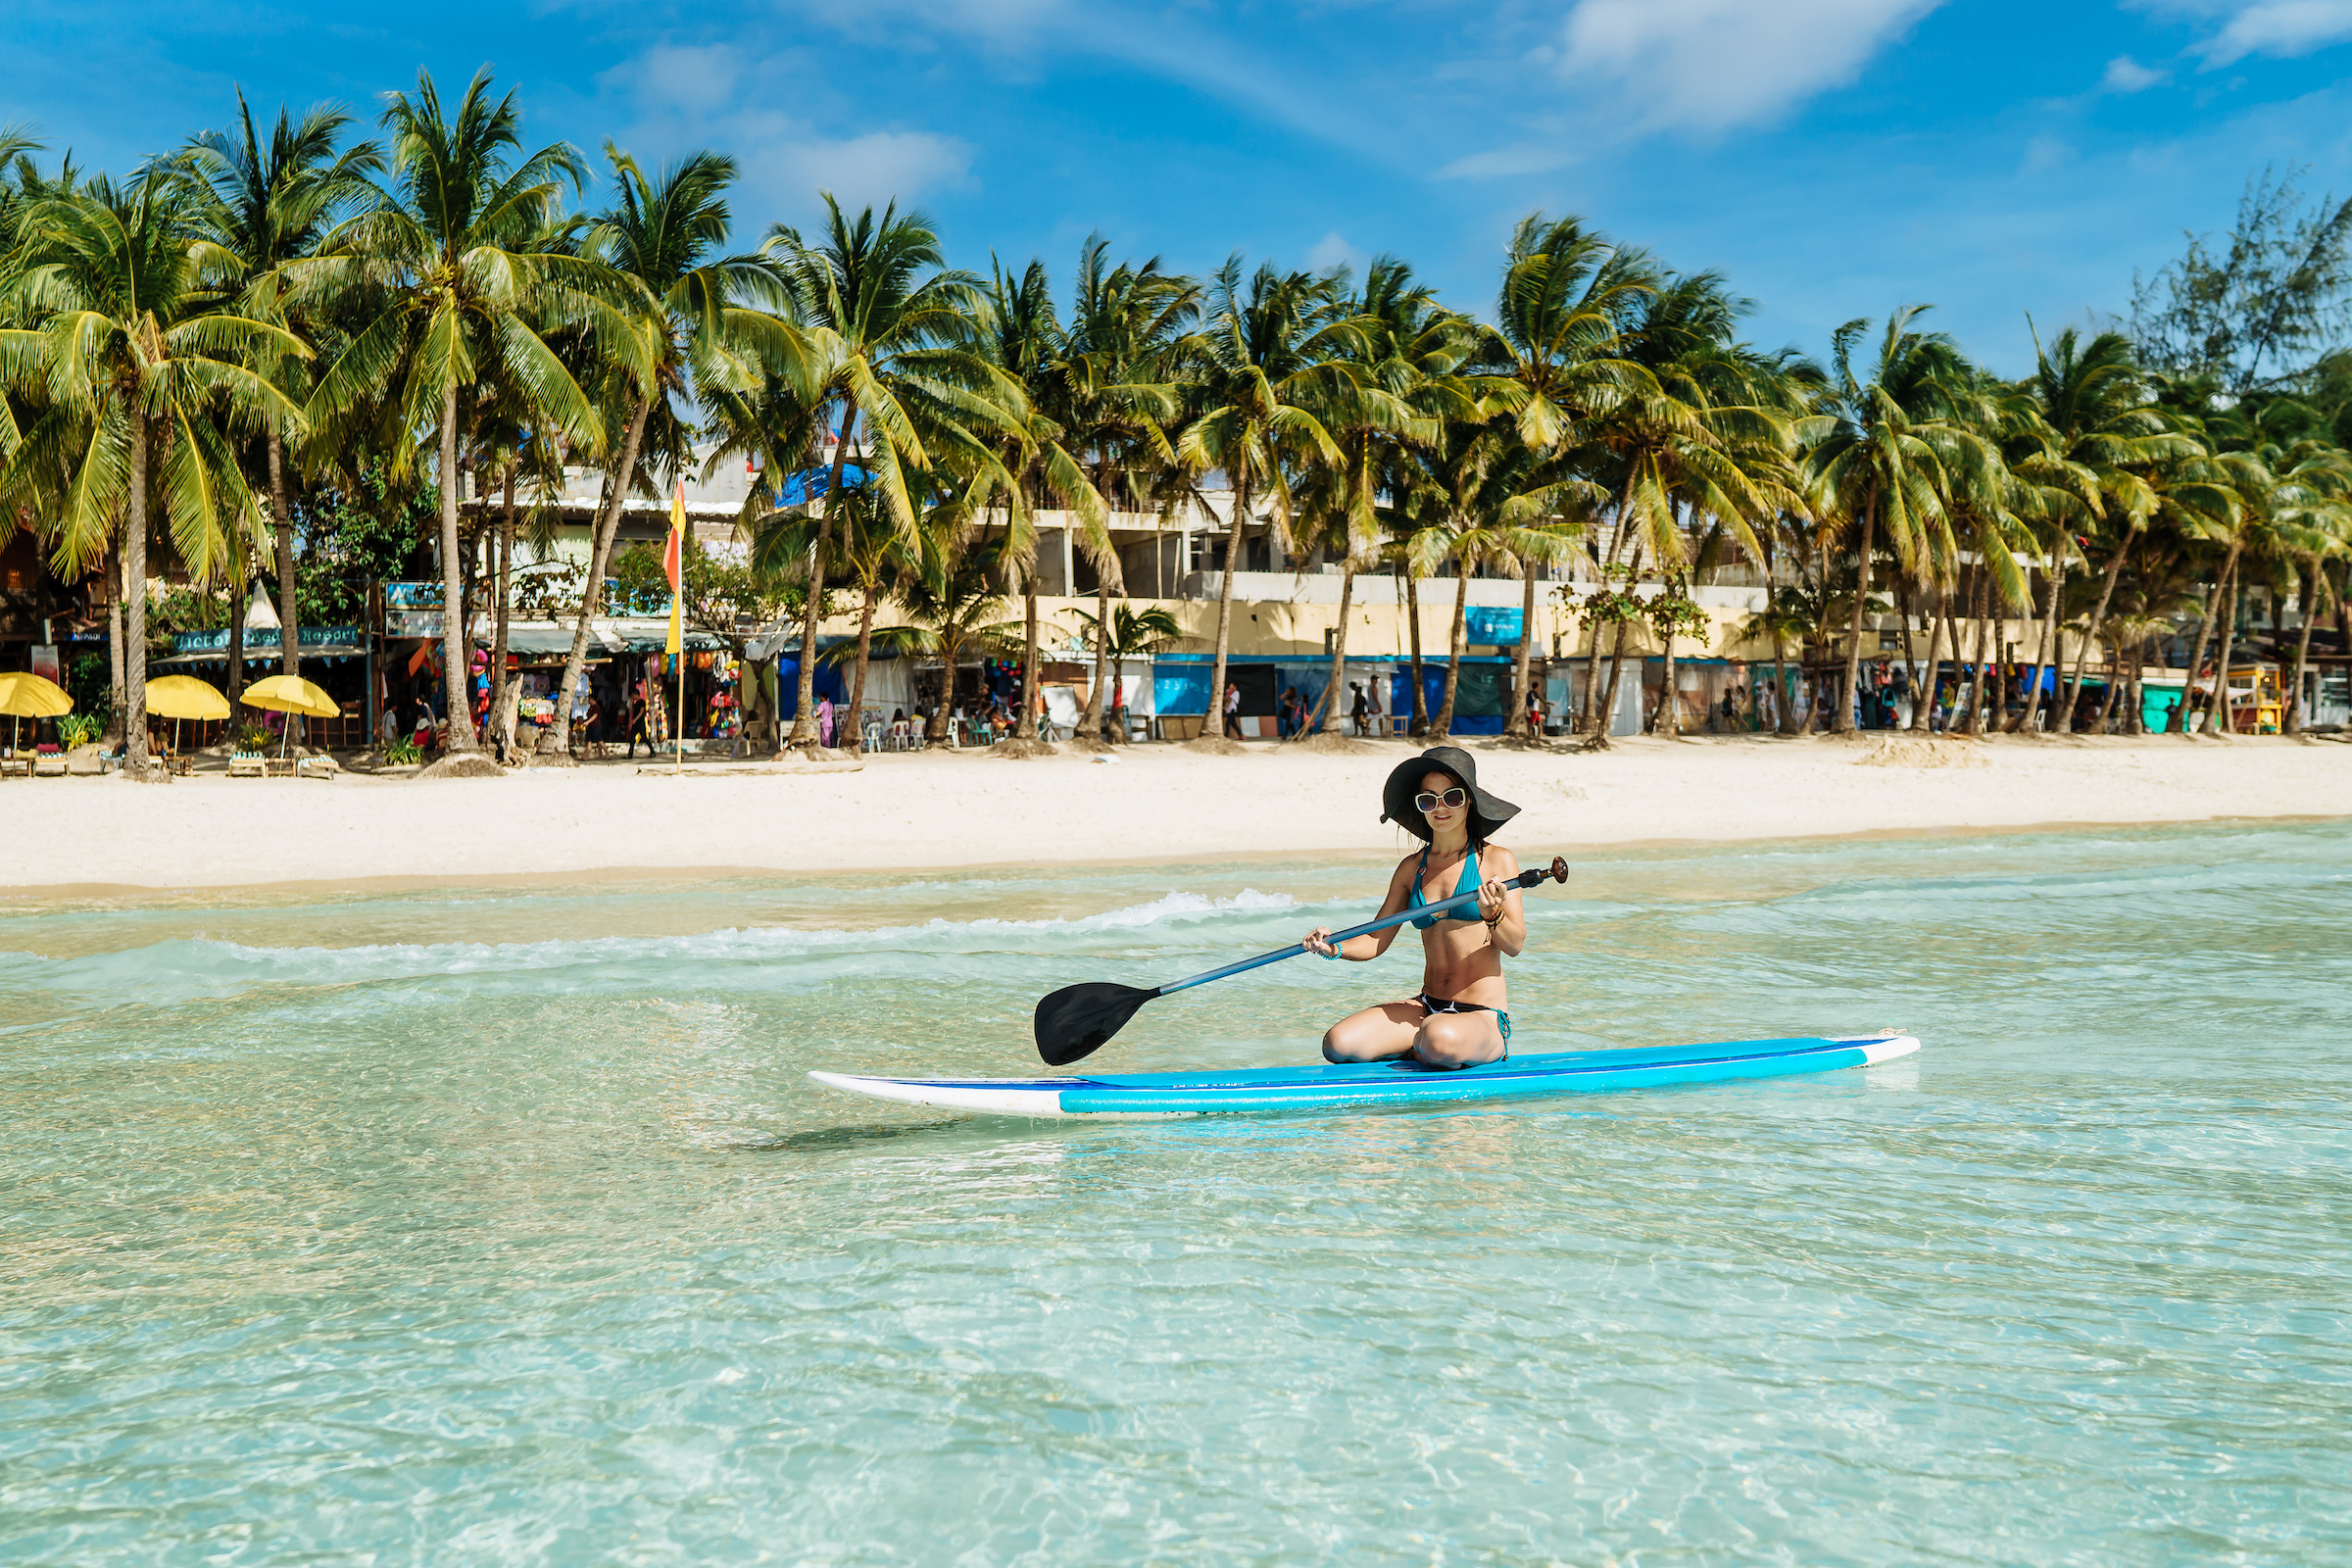 A tourist trying to get the hang of paddle boarding in Boracay